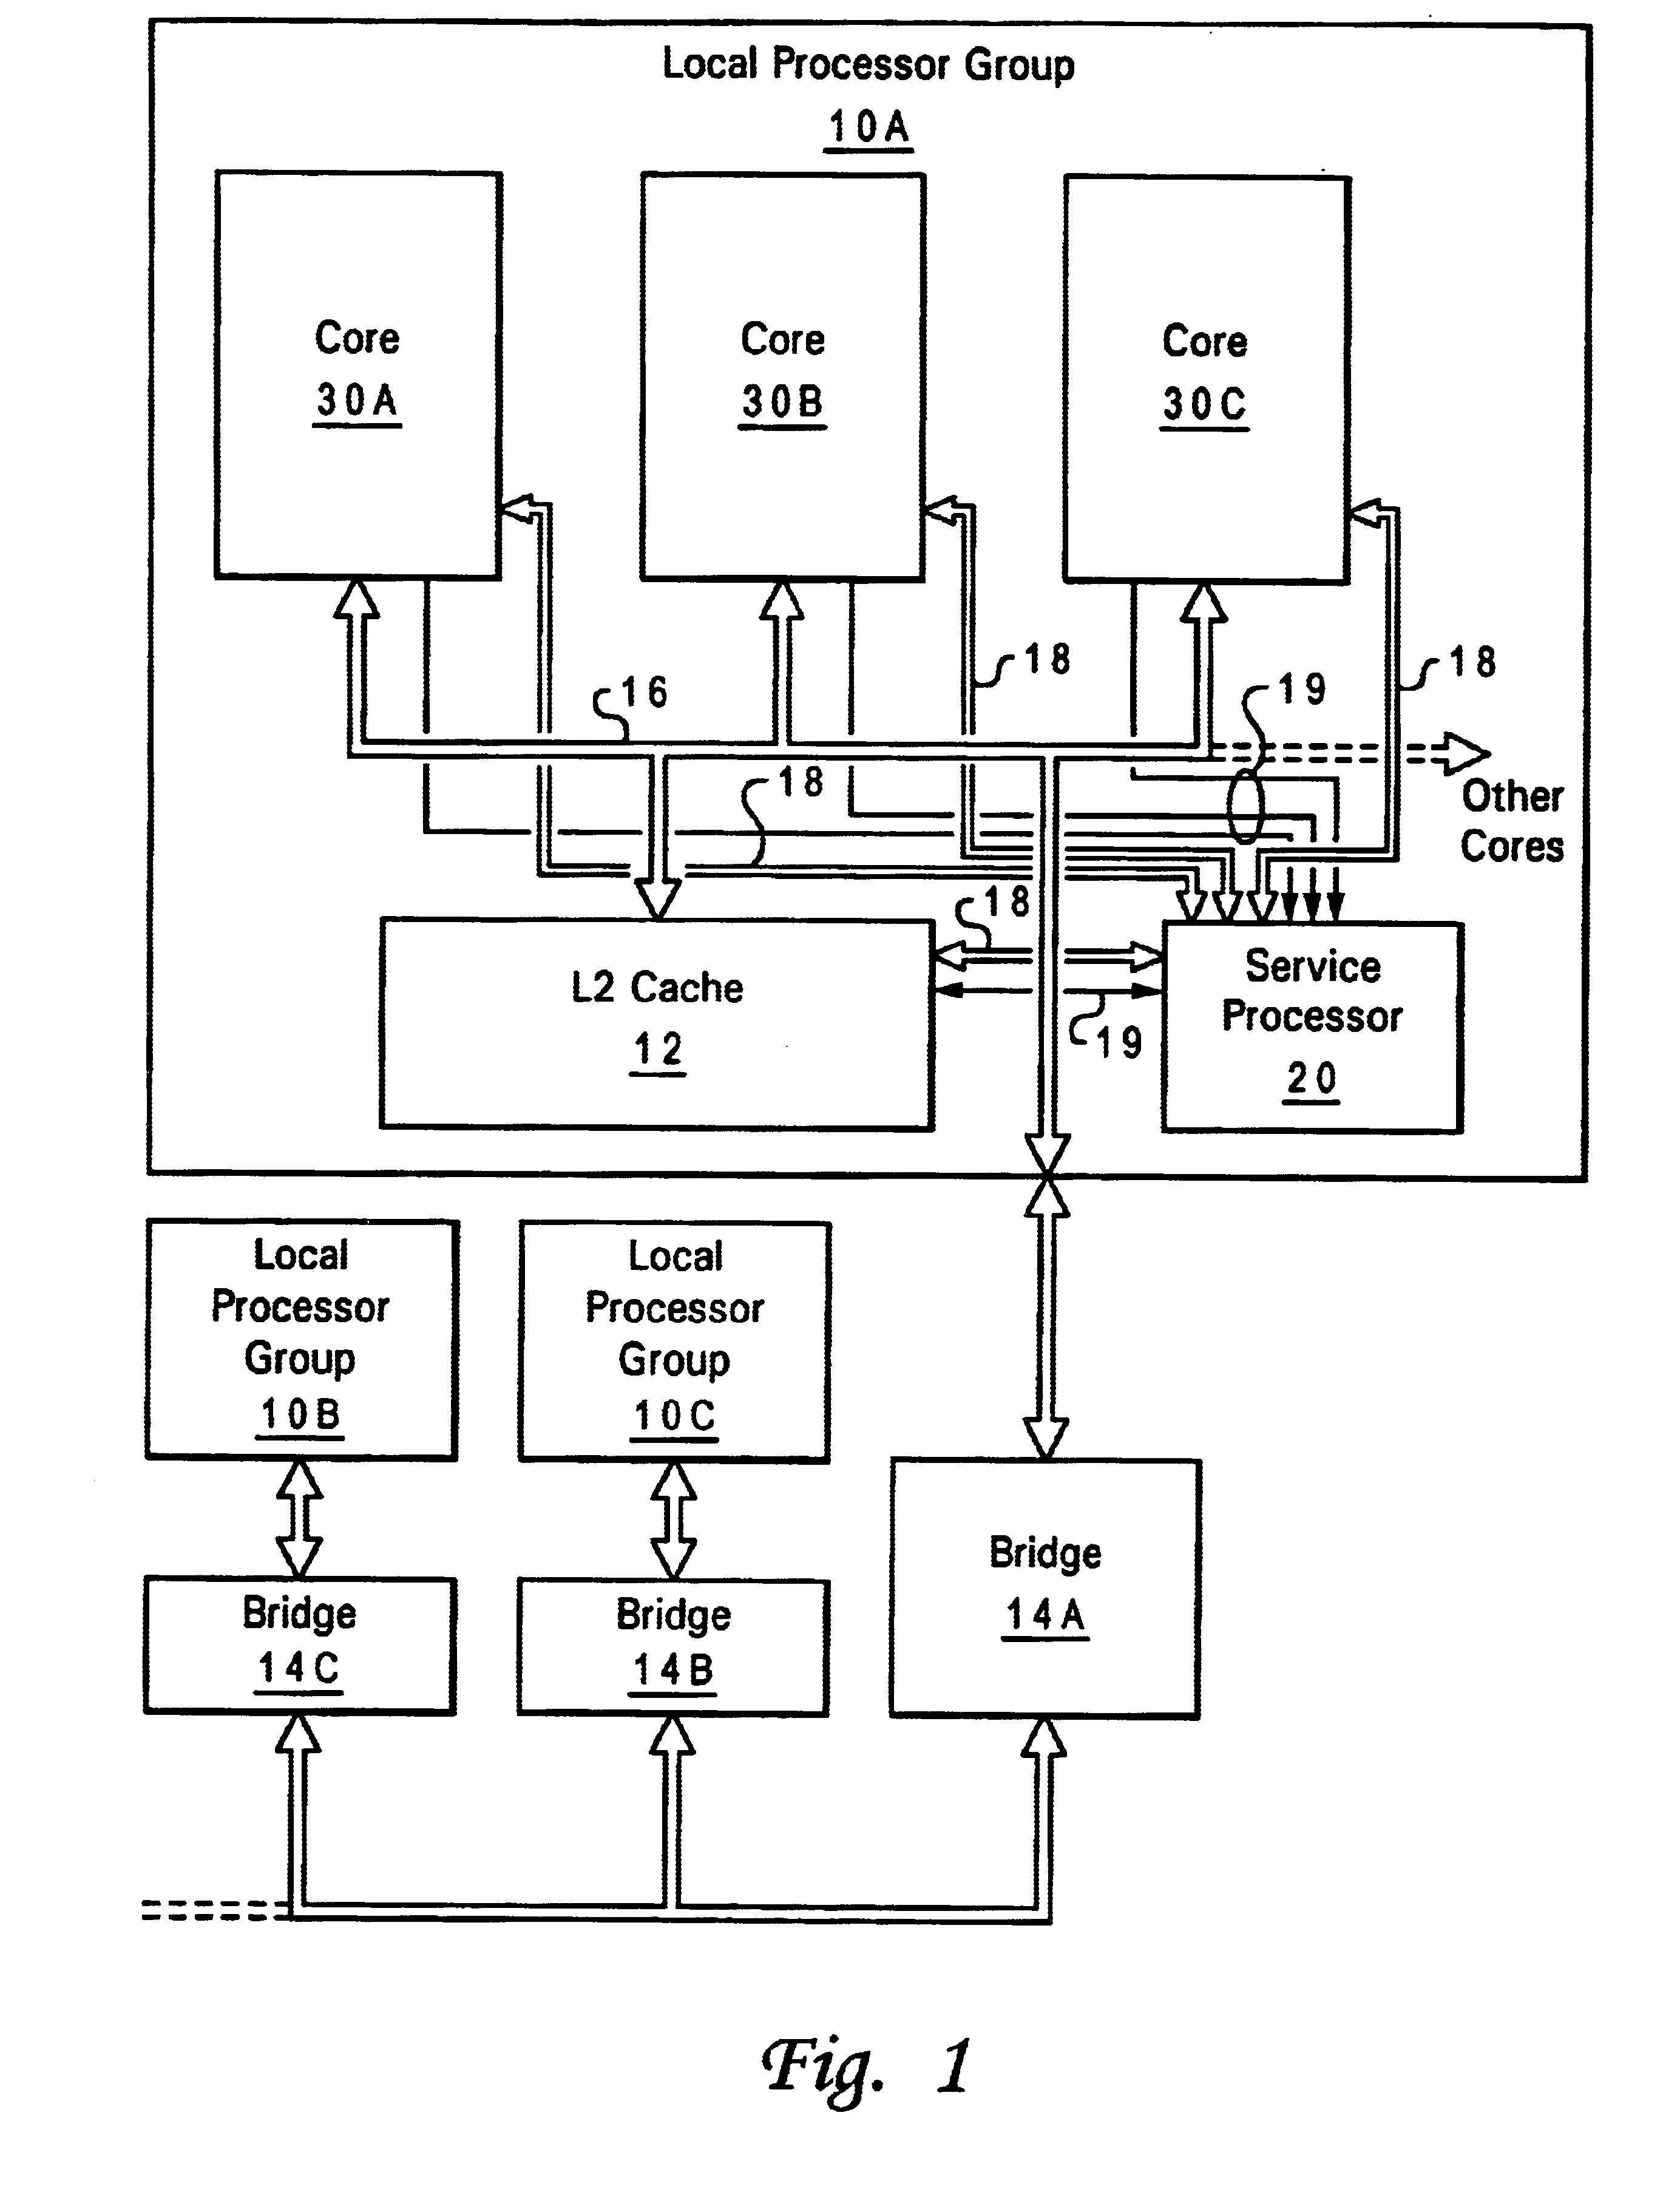 Method and apparatus for servicing a processing system through a test port